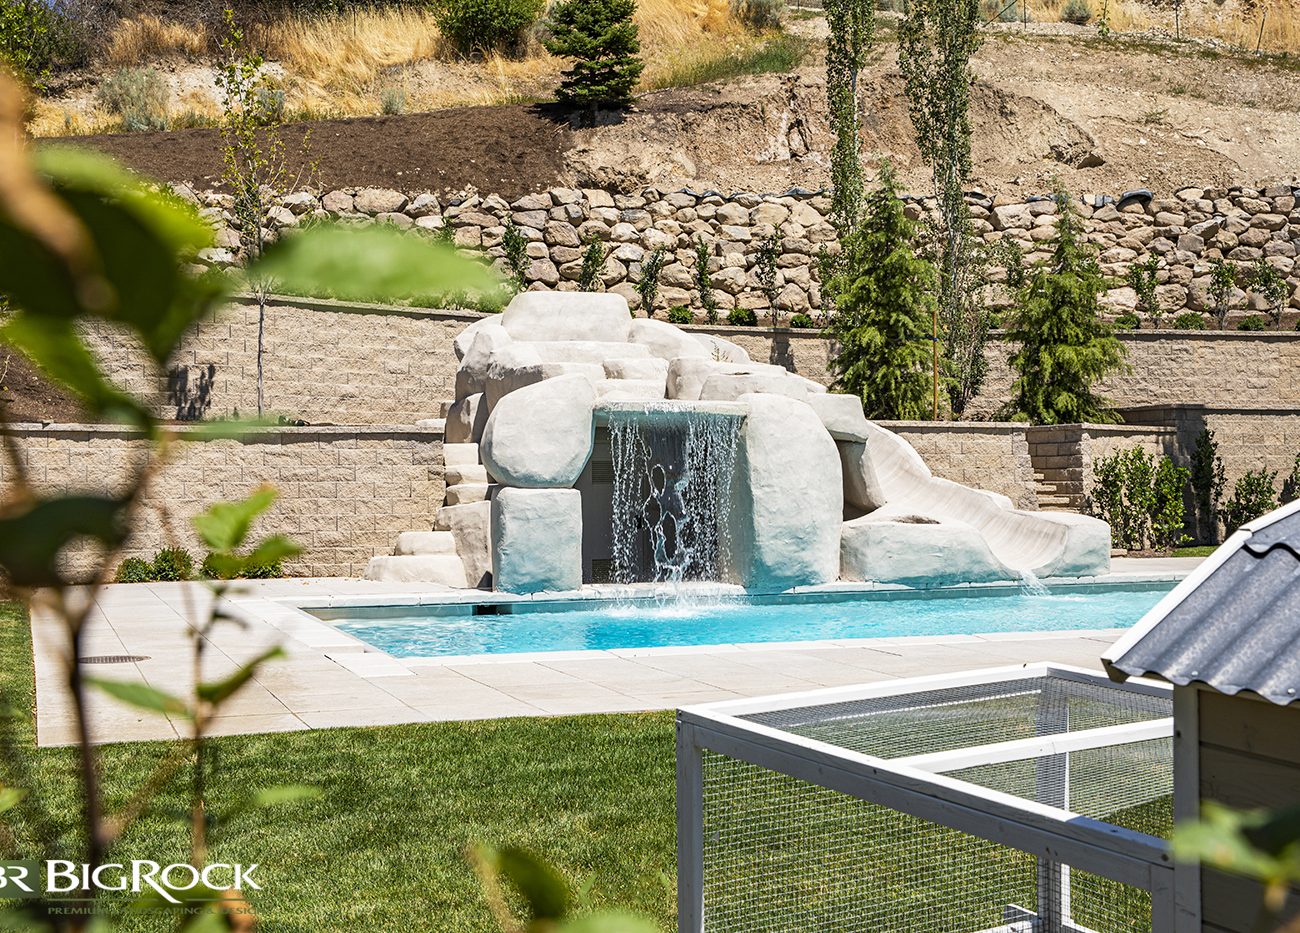 Step up your backyard pool with a flowing water feature built-in to the landscape.